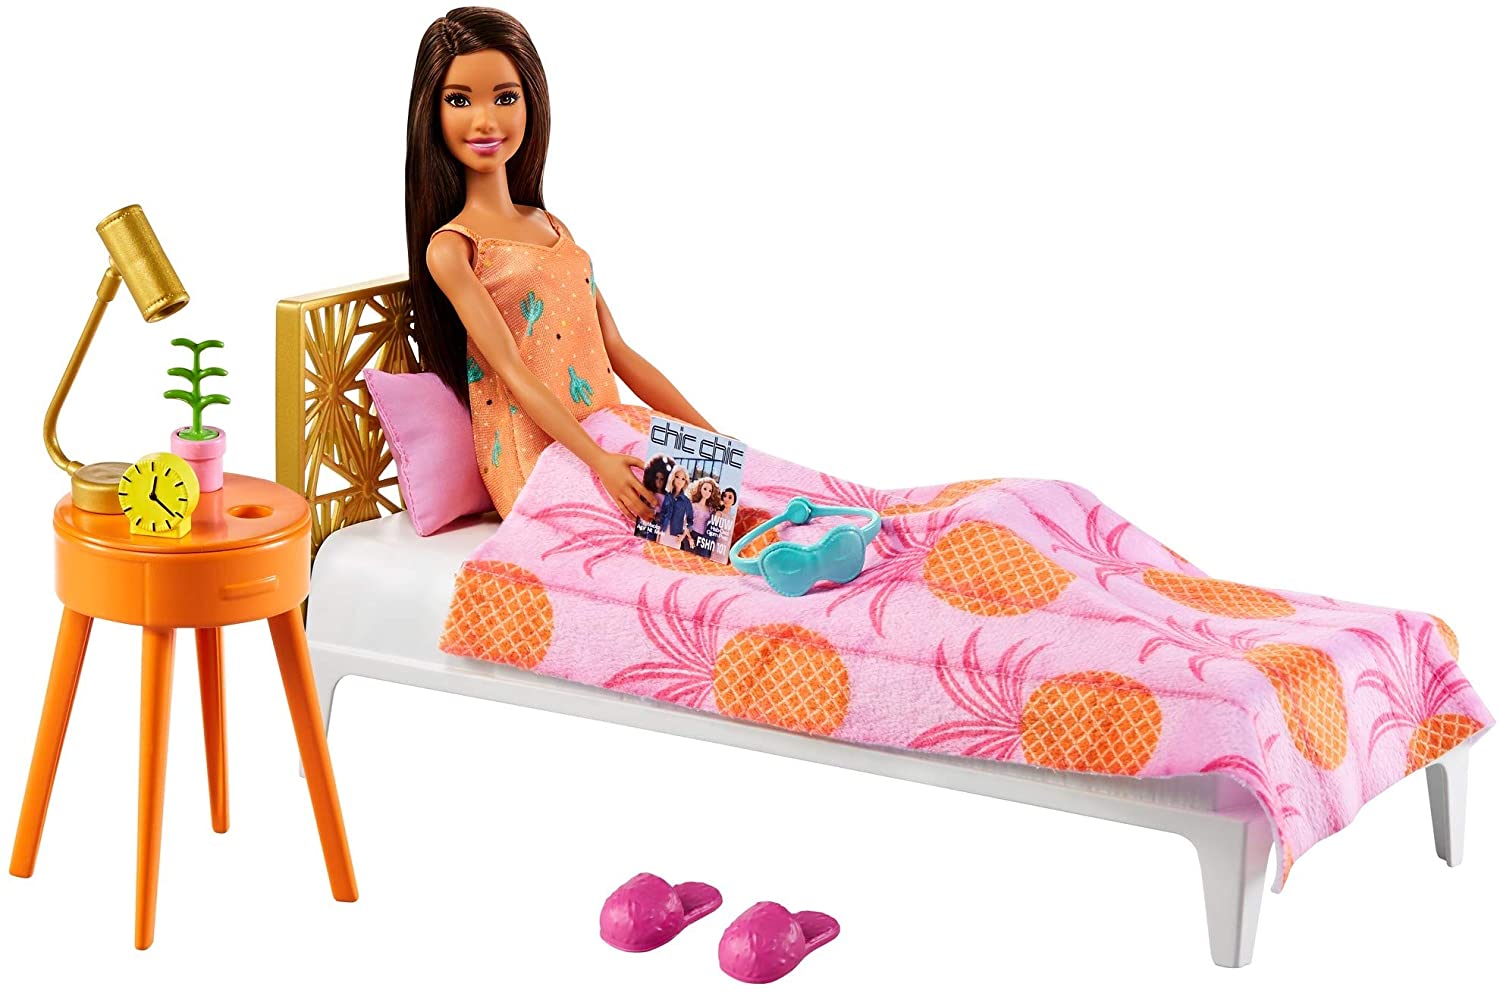 New Barbie 2021 doll Playsets: Lifeguard, Pediatrician, Veterinarian,  Tourist and much more 